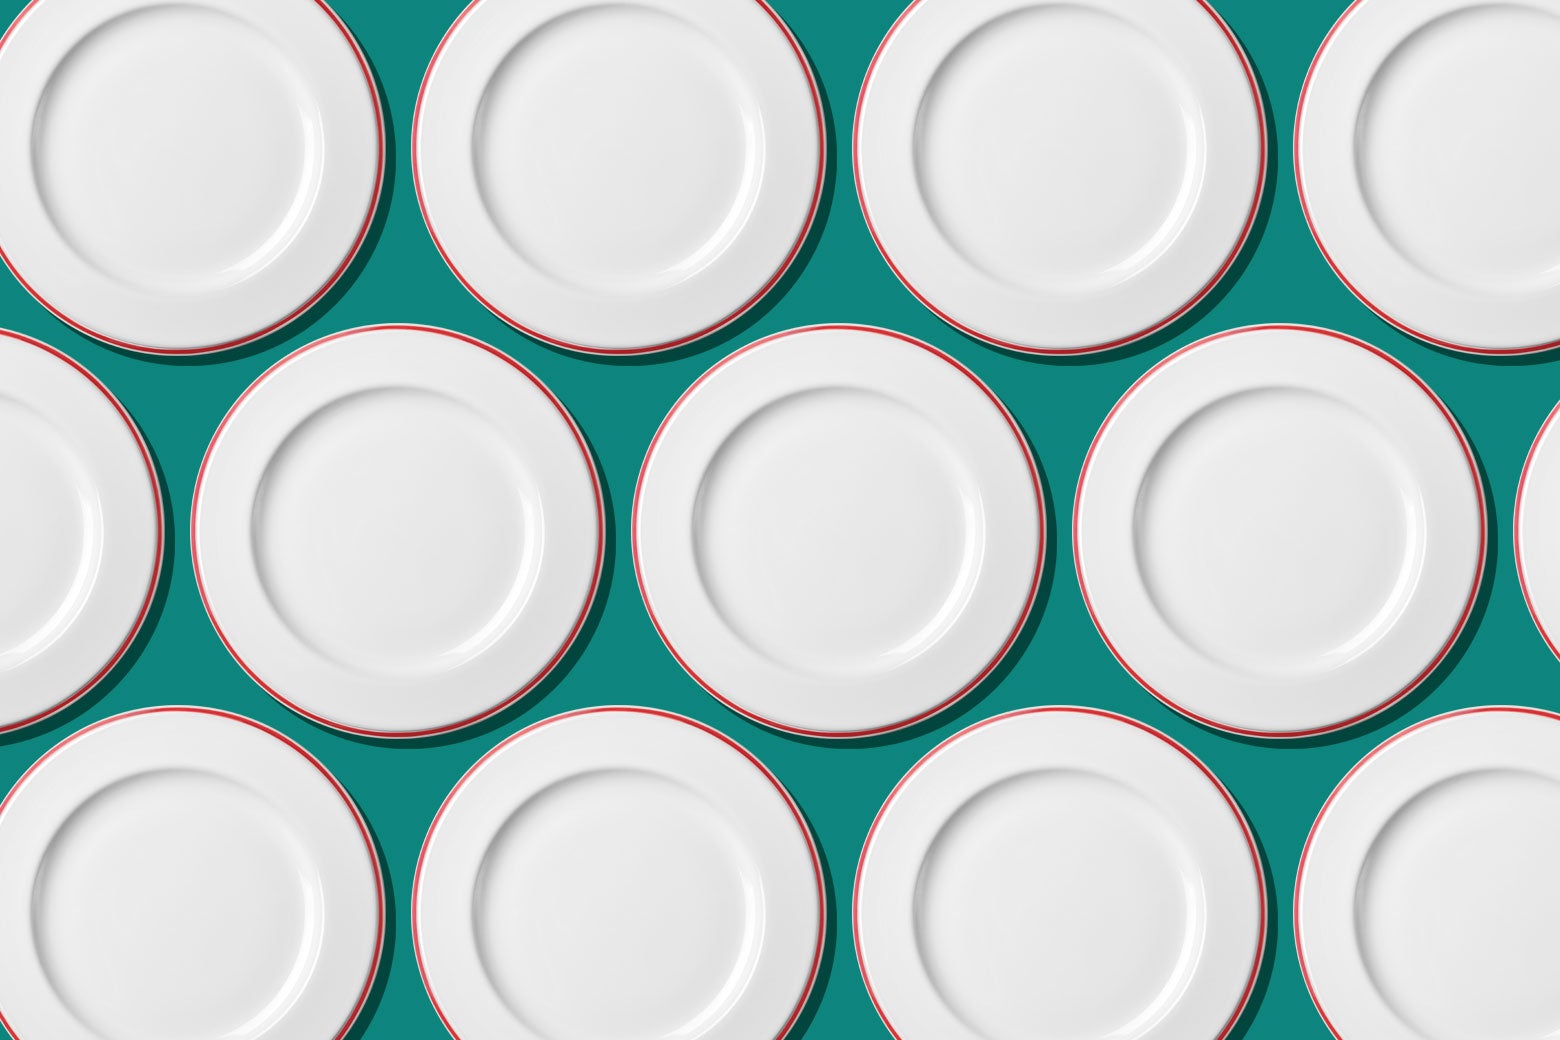 Rows of empty plates.